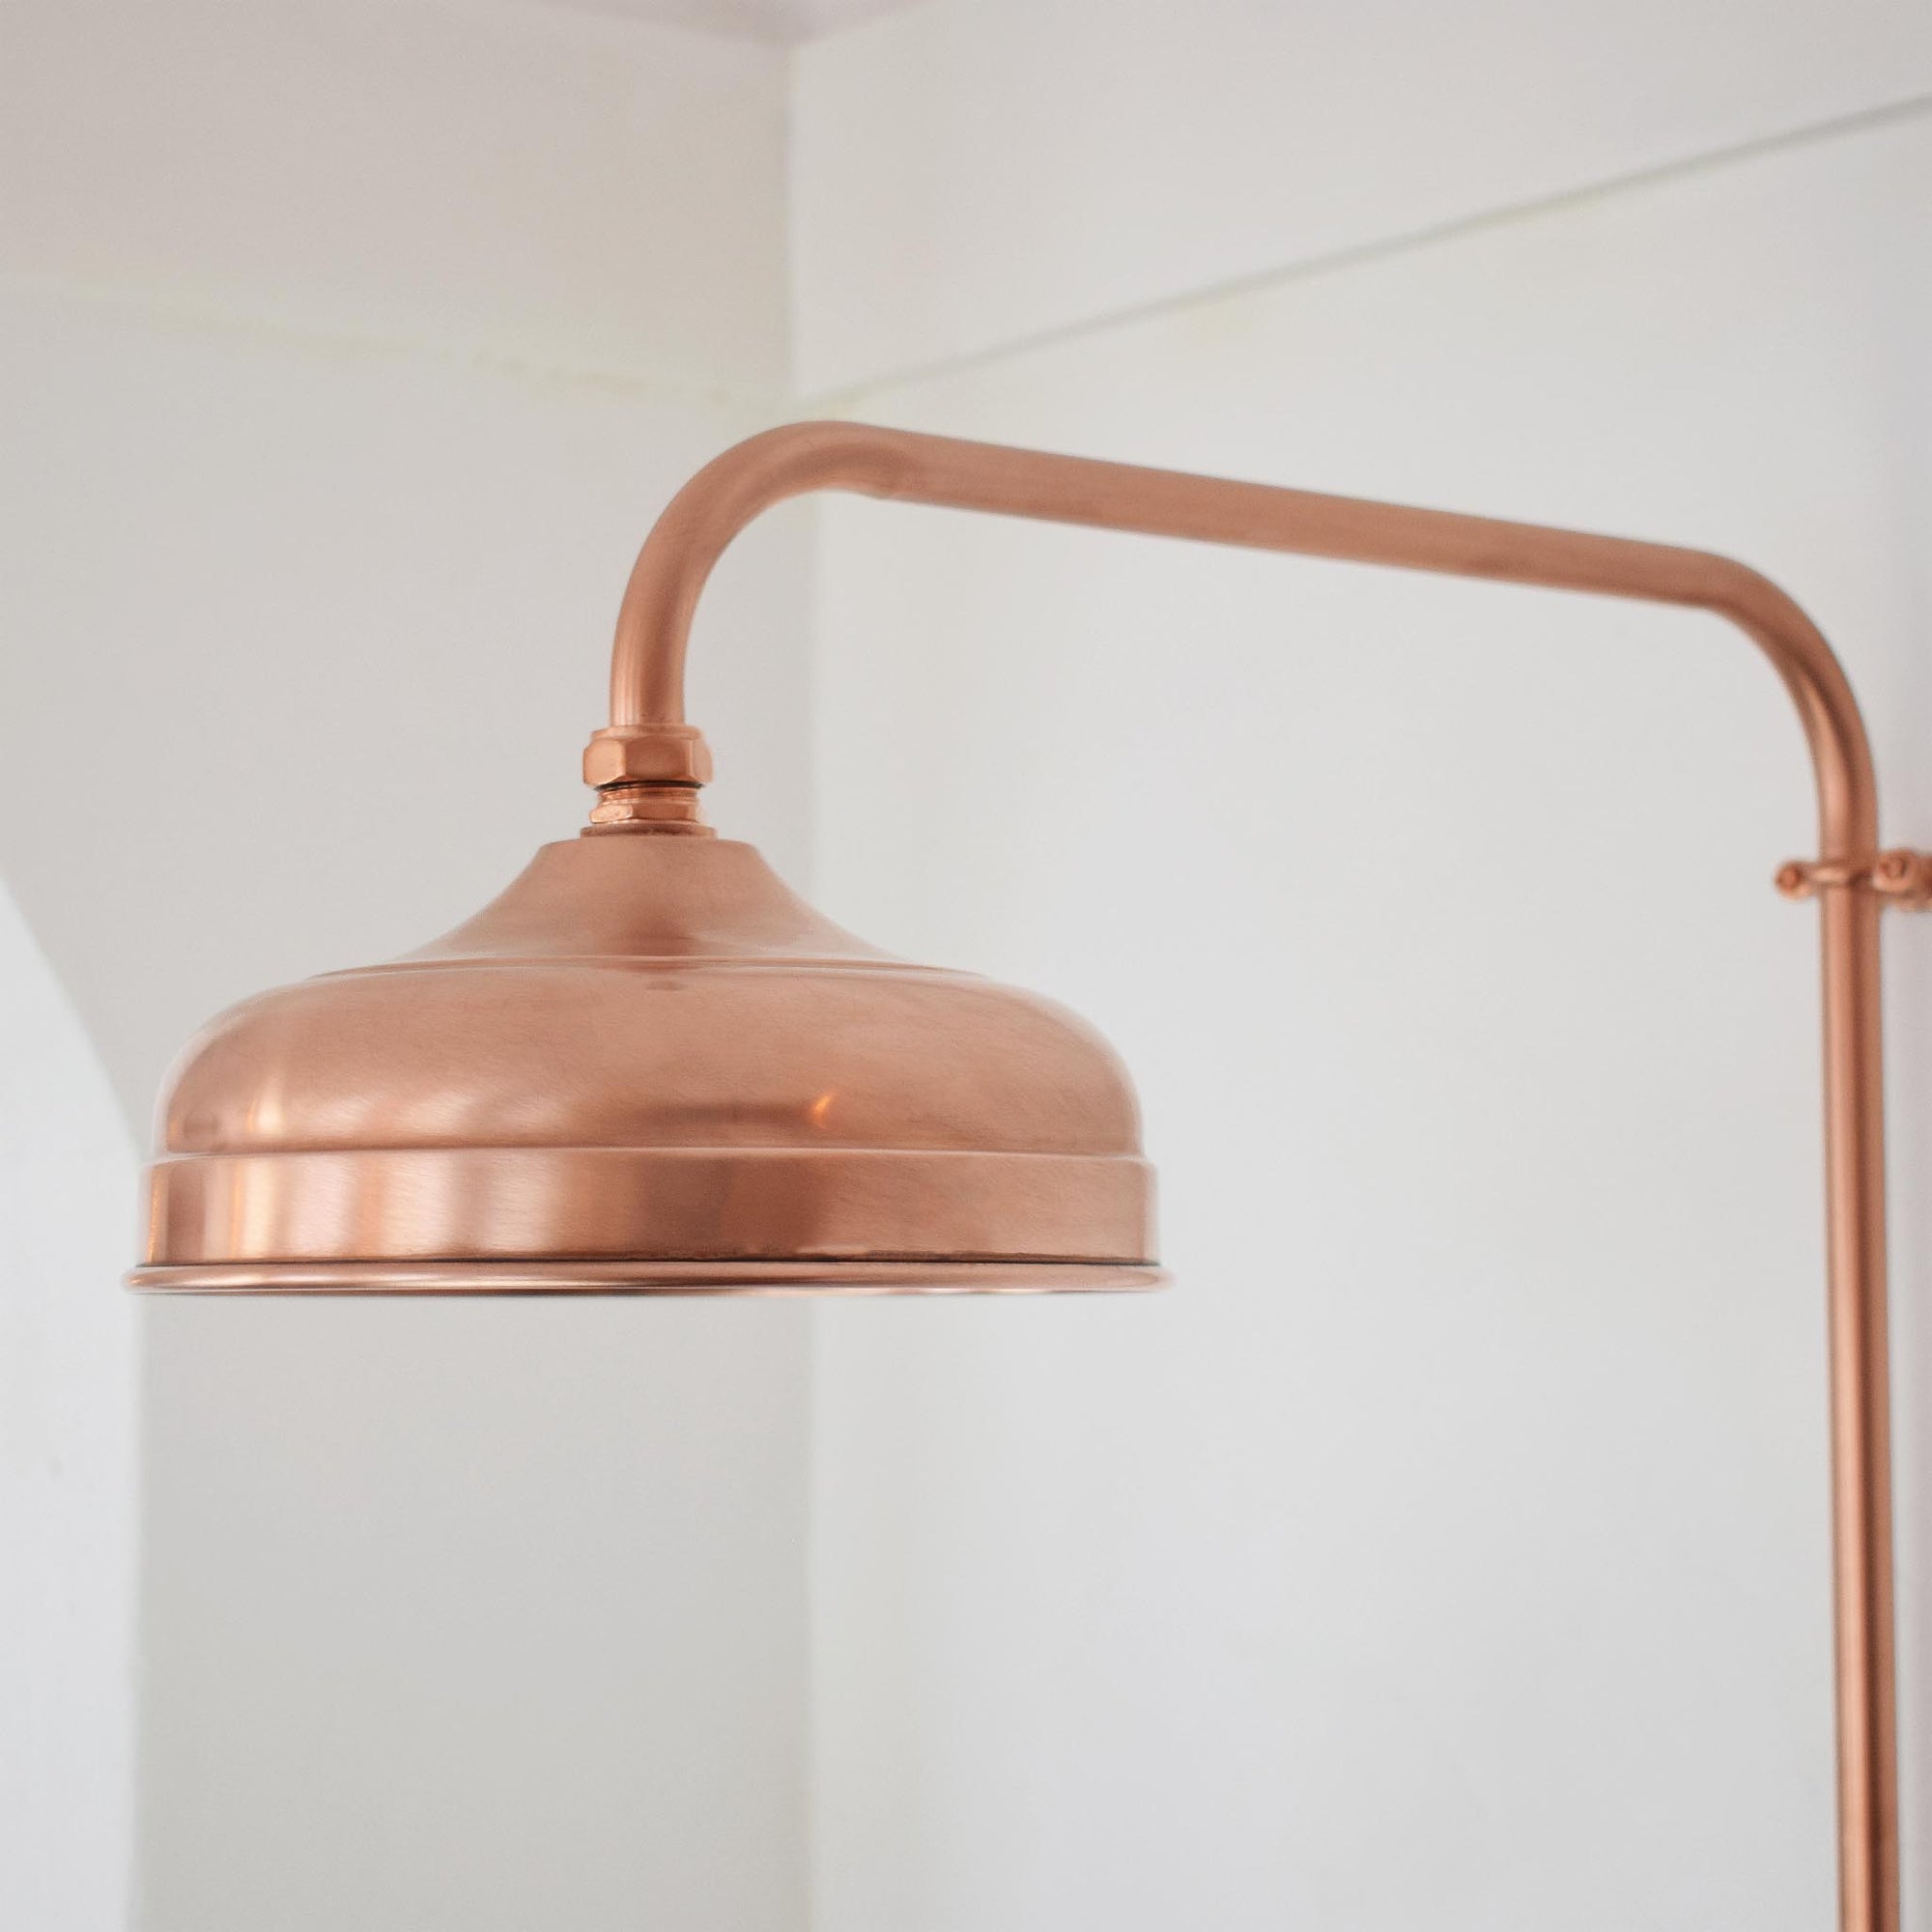 copper shower head on a Thermostatic shower valve